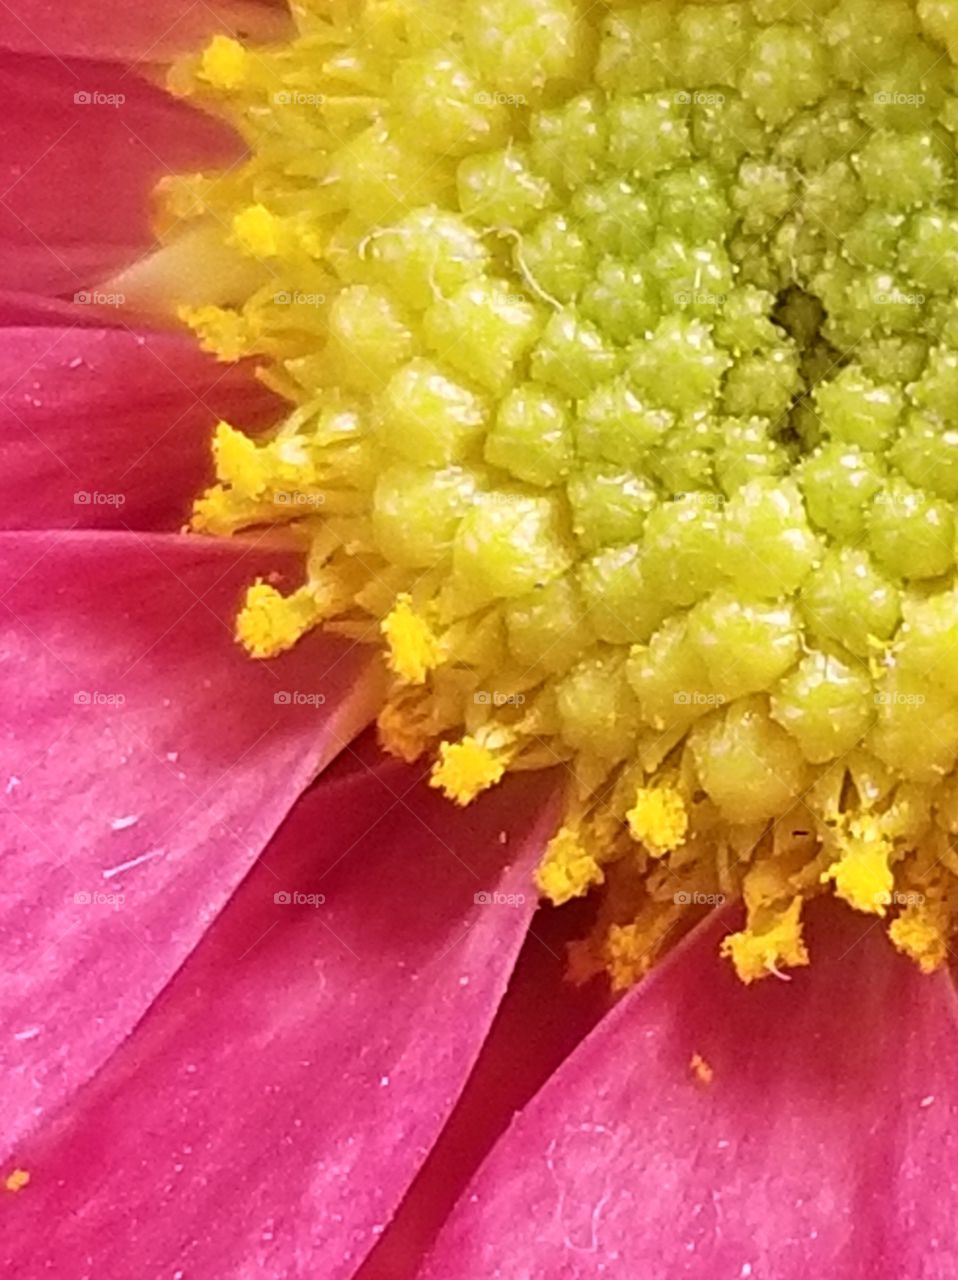 Close up of center of a pink flower.